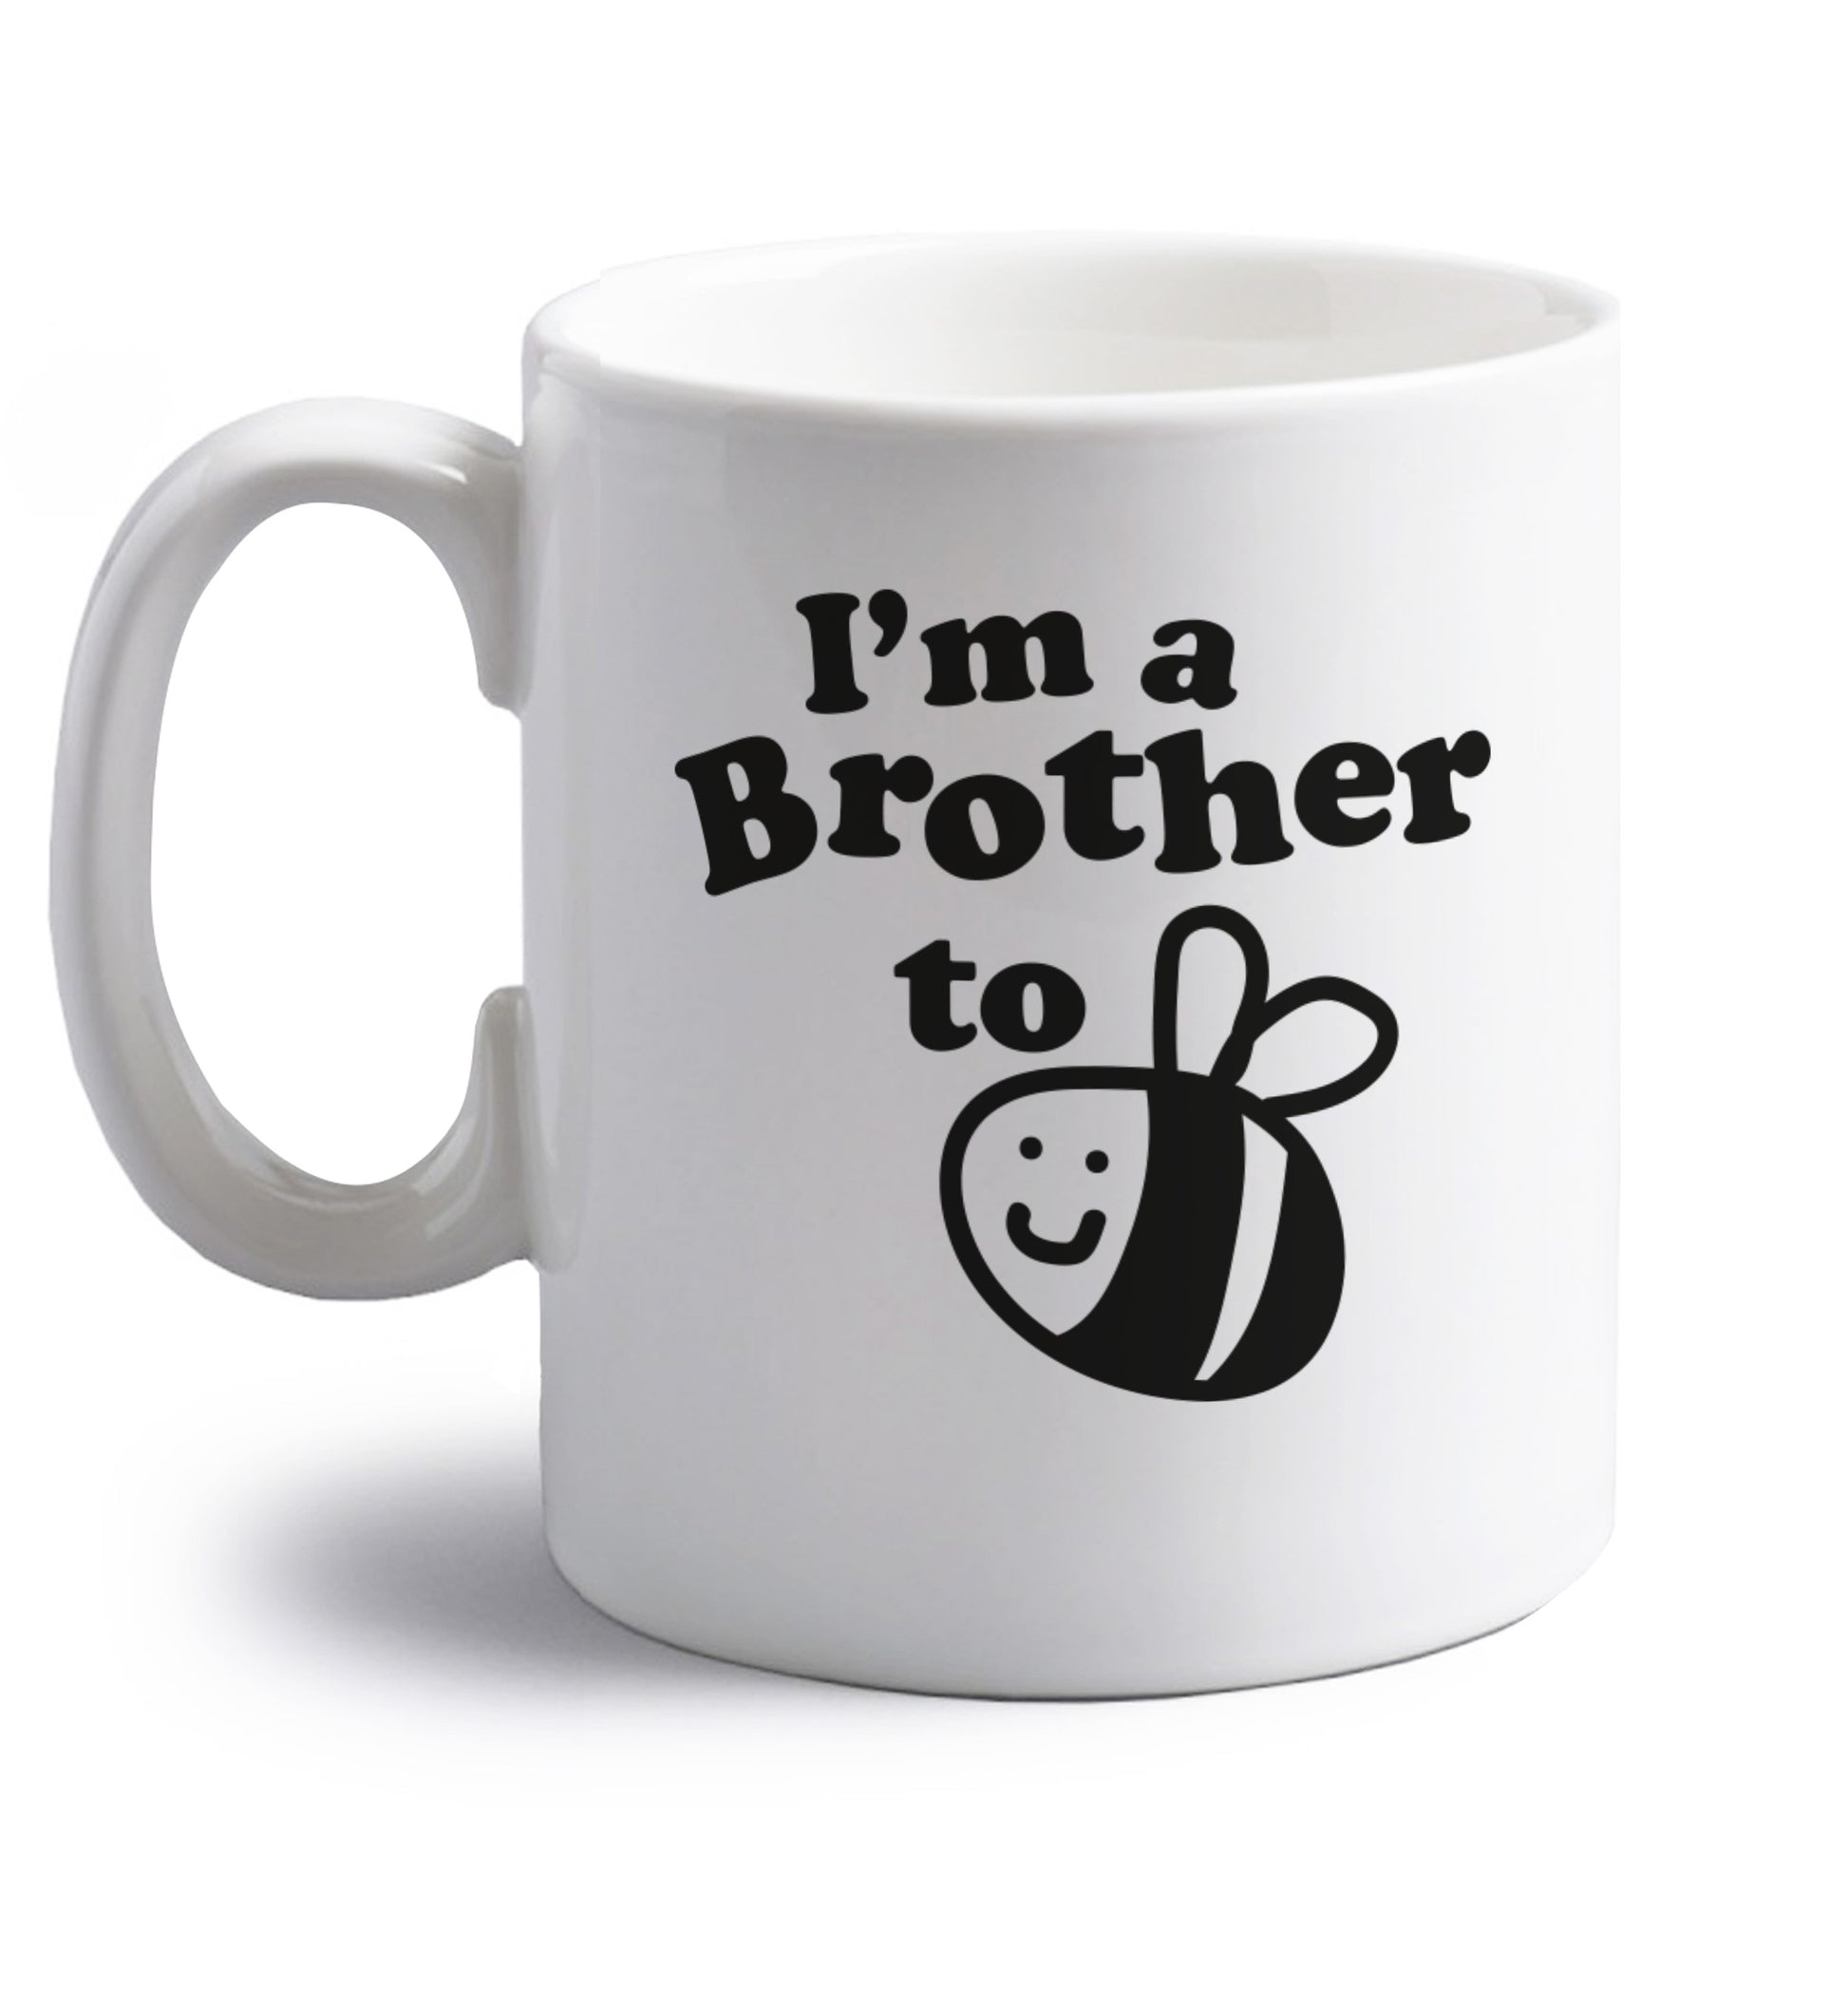 I'm a brother to be right handed white ceramic mug 